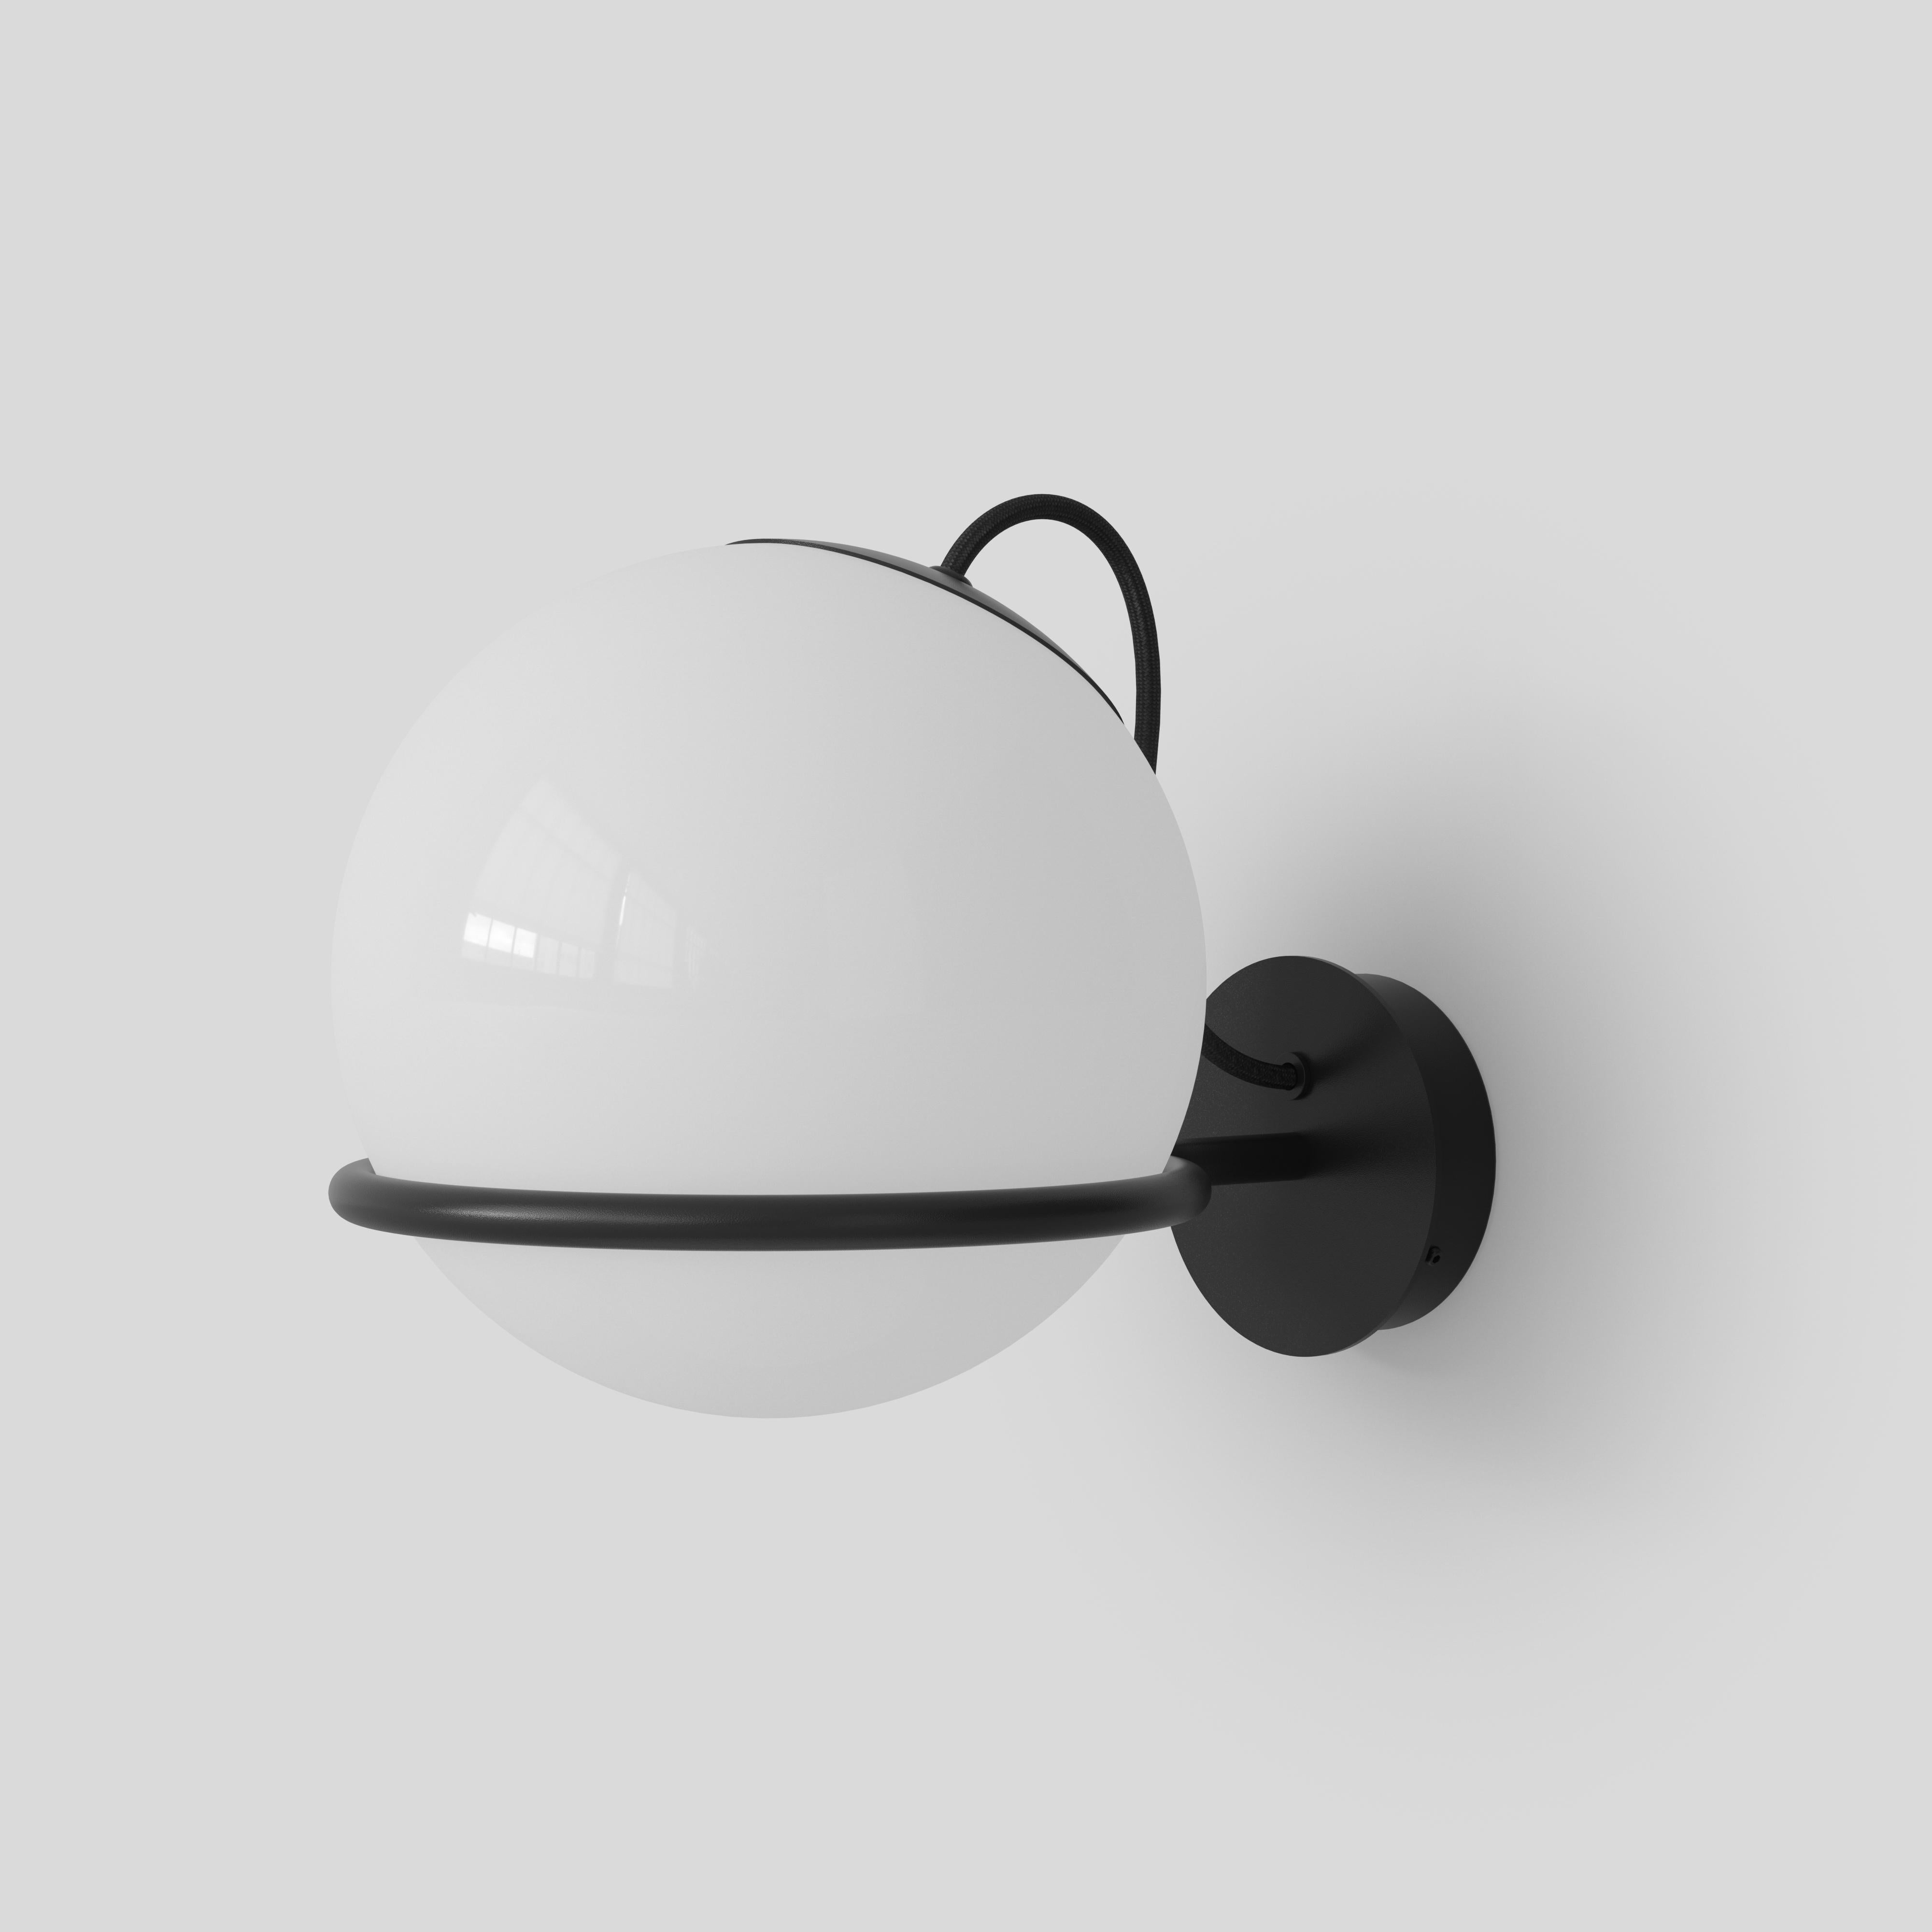 Model 237/1
Design by Gino Sarfatti
The single blown opaline glass sphere is gently held by a Black or Champagne painted aluminium ring. The aluminum ring has a small cut, enabling the sphere to be placed facing downward or upward and thus providing